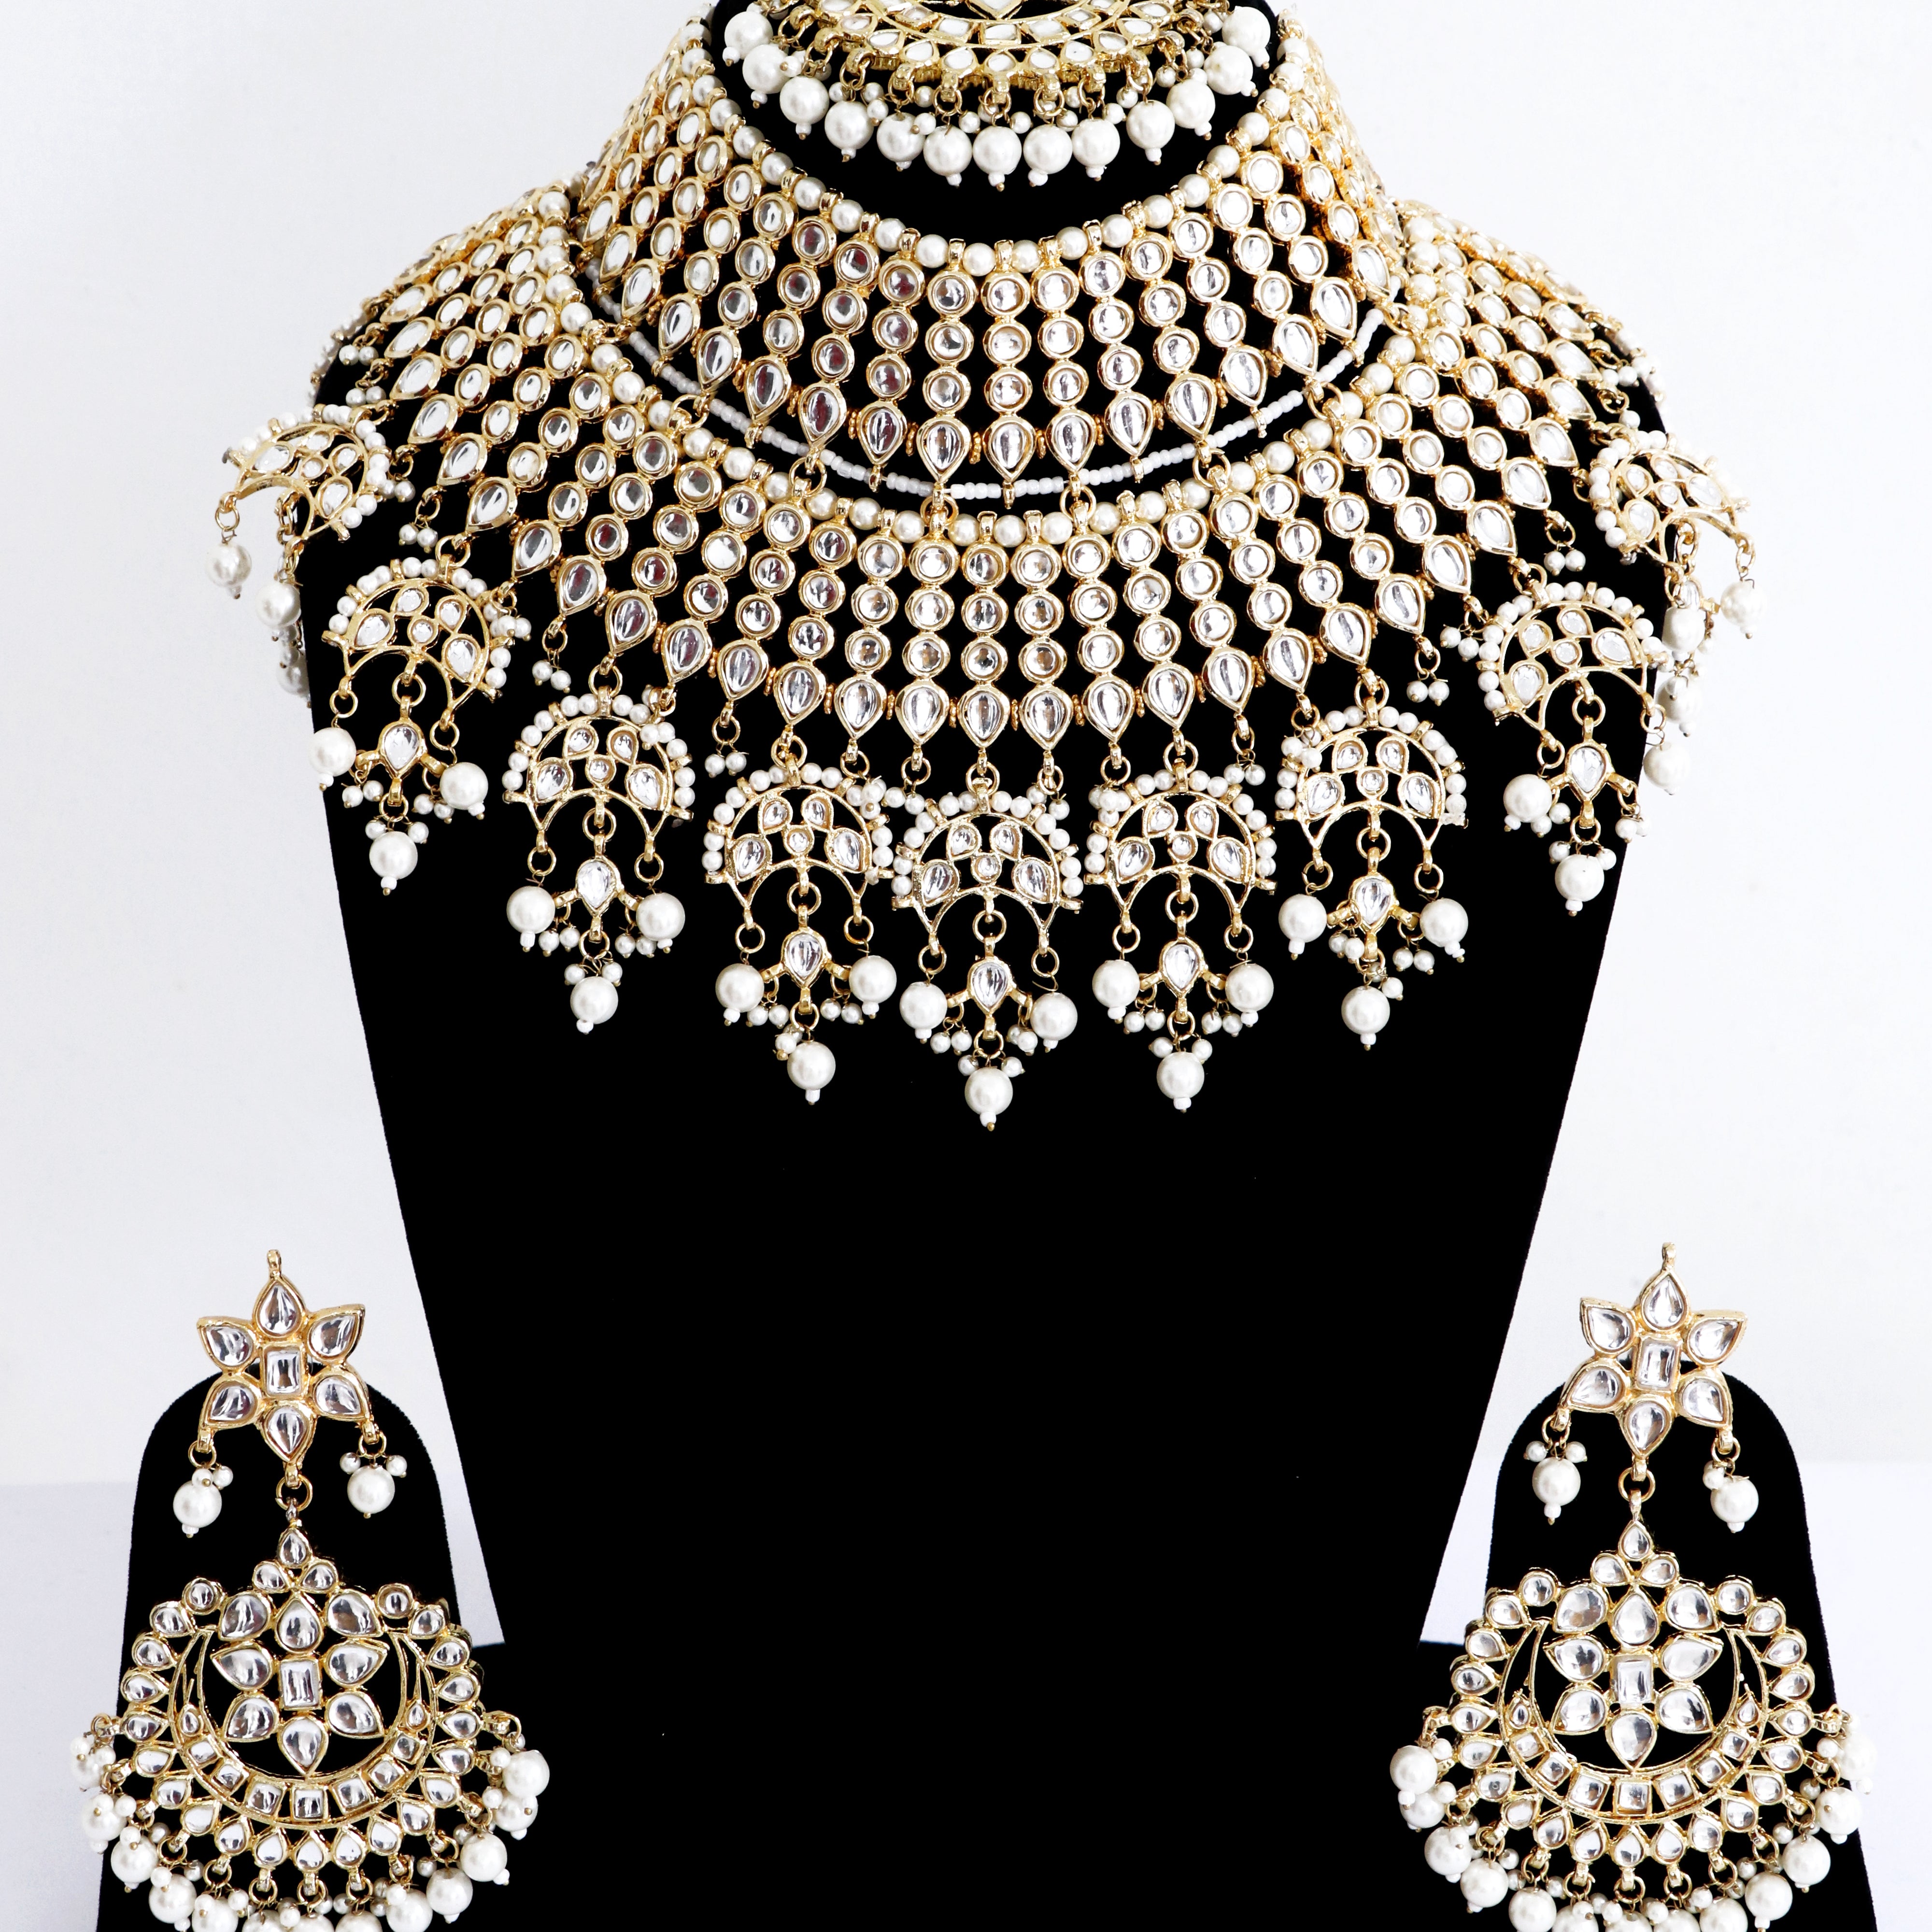 Kundan Bridal Necklace Set with Earrings and Maang Tikka - White